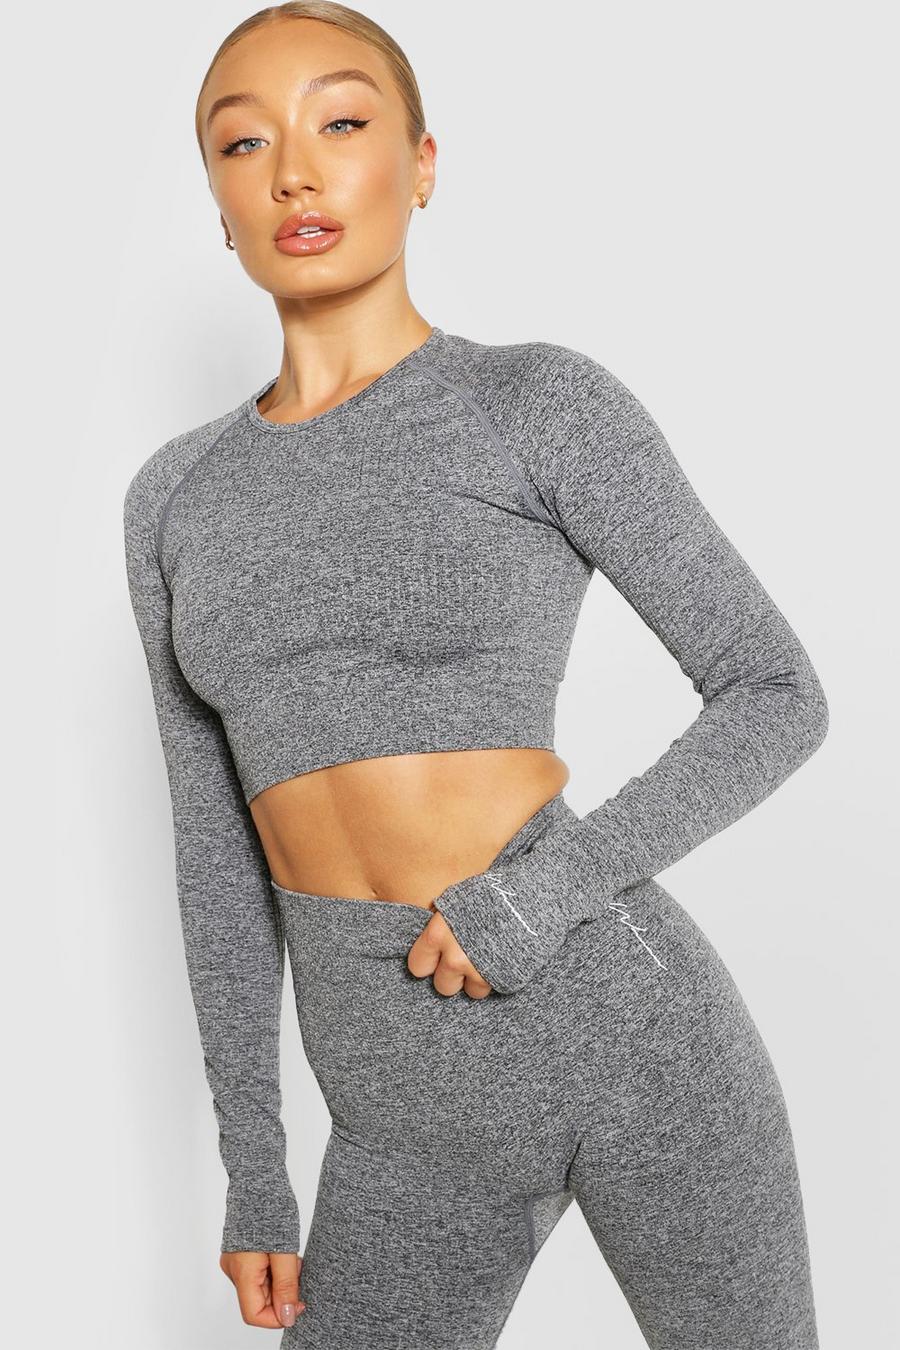 Women's Ribbed Seamless Long Sleeve Gym Top